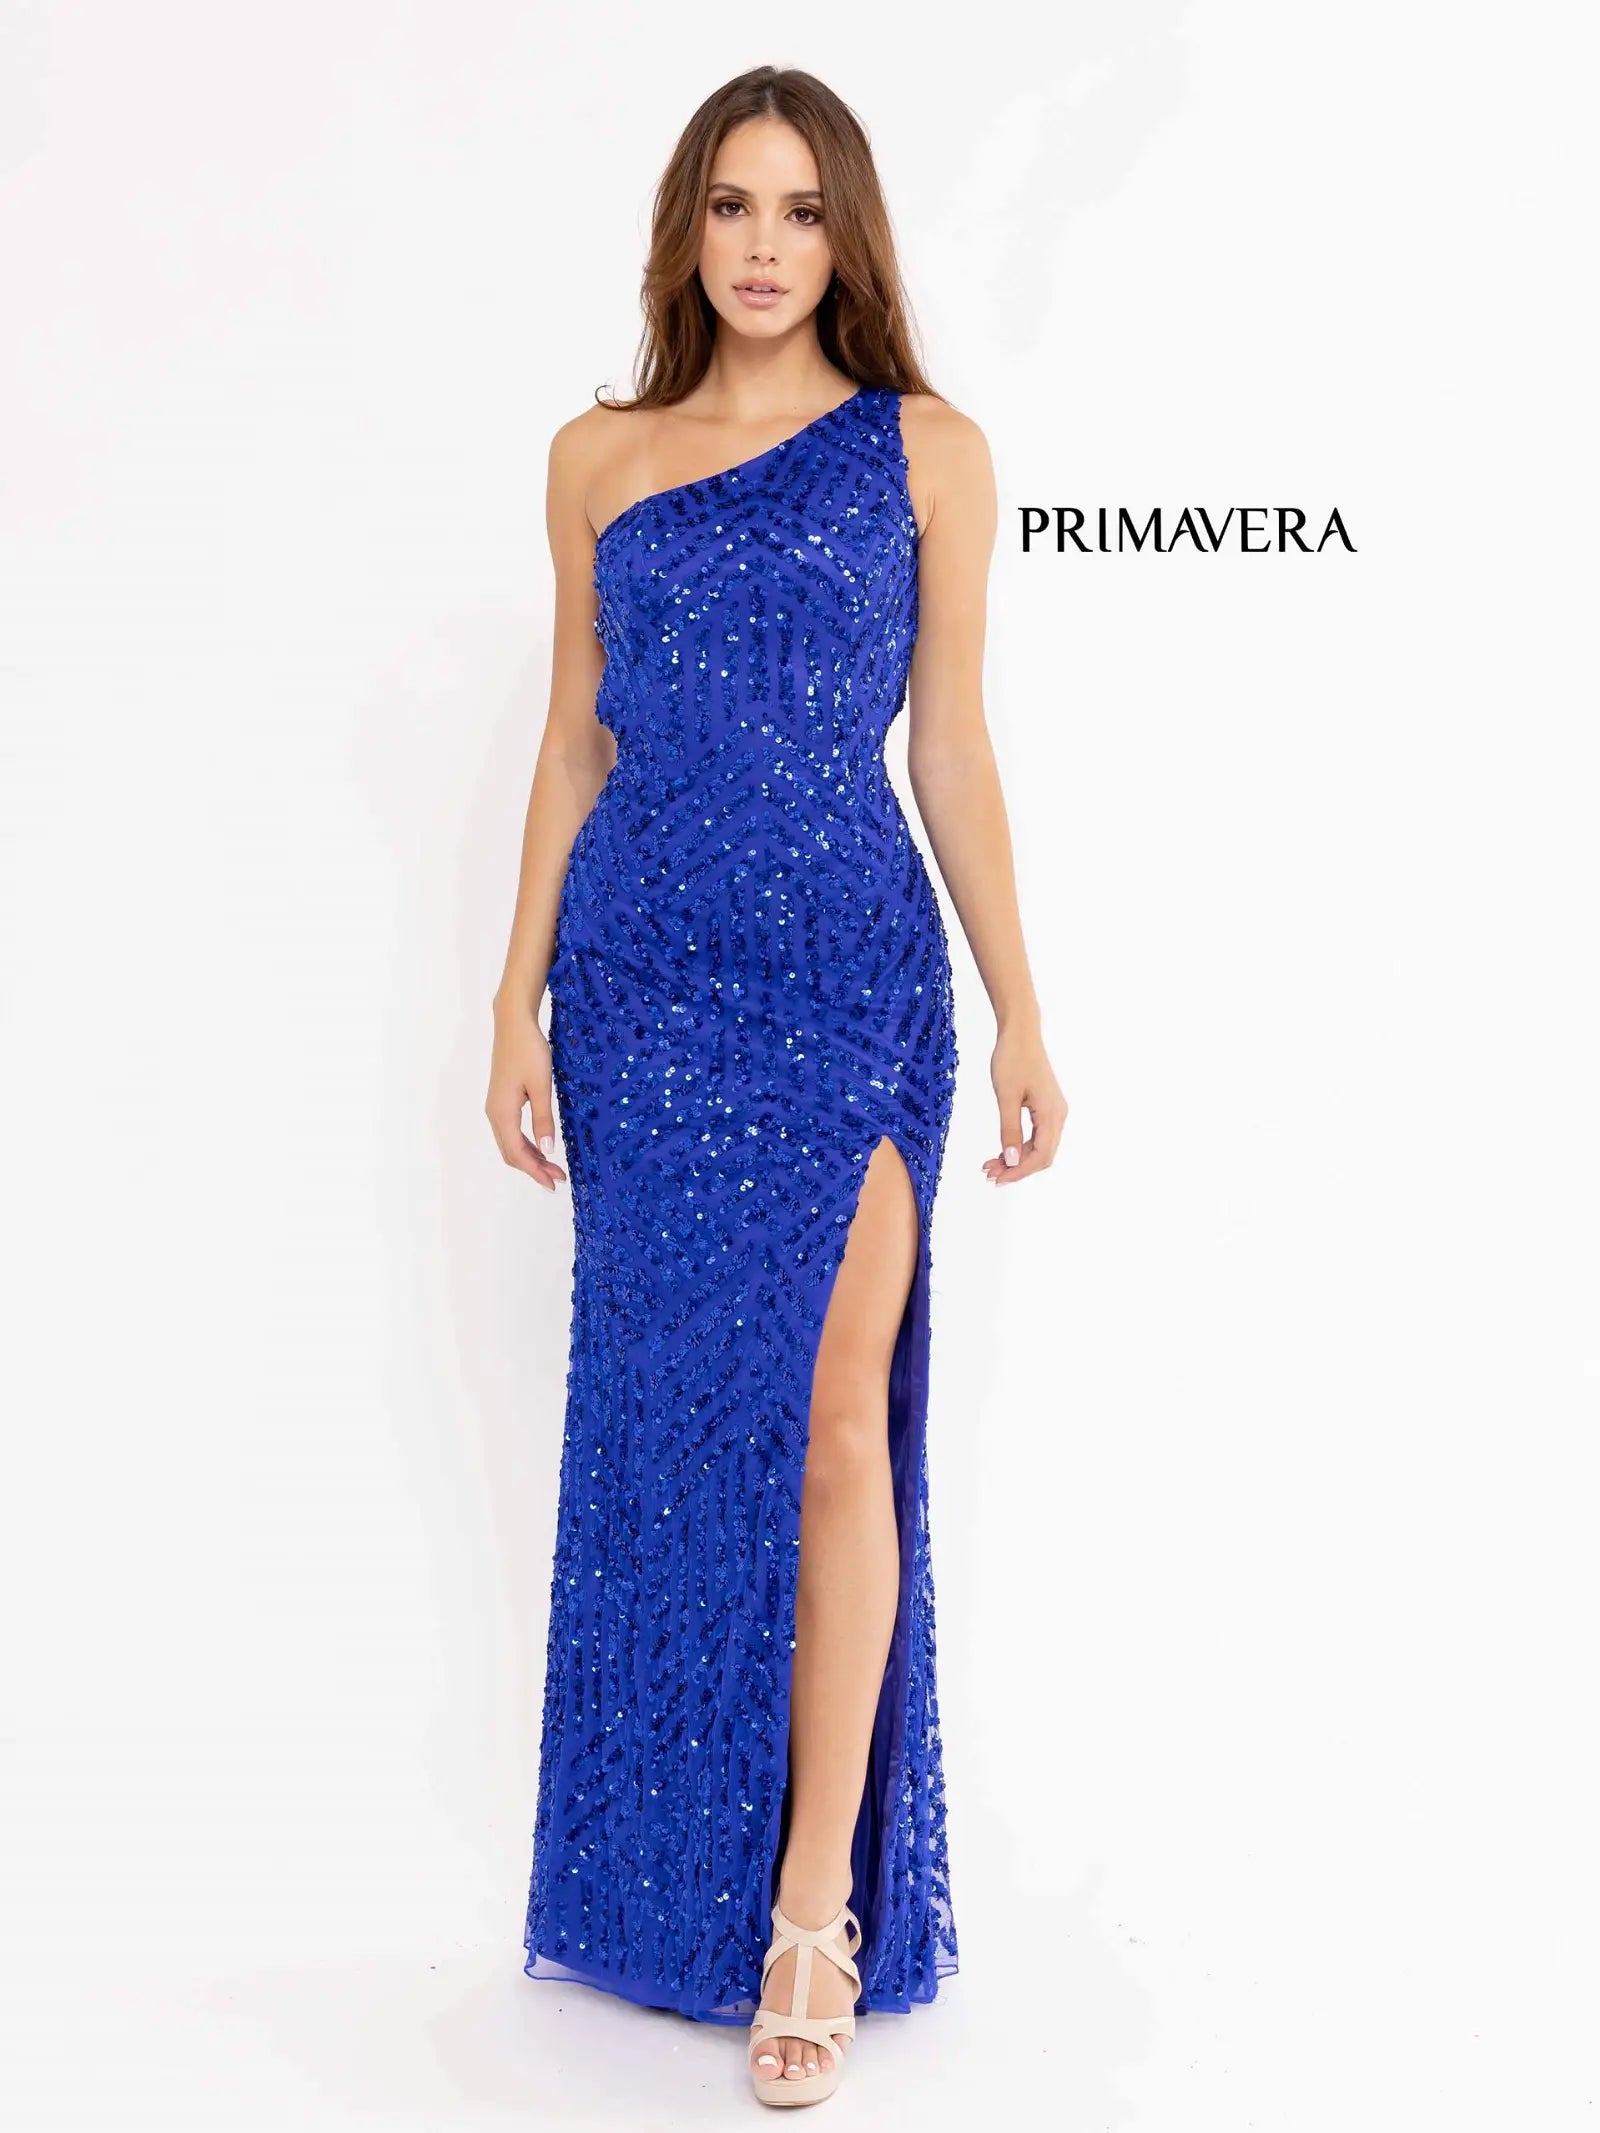 Primavera Couture 3951 Prom Dress Long Beaded Dress. This Gown has a beautiful one shoulder it has a gorgeous se design going down the dress. 